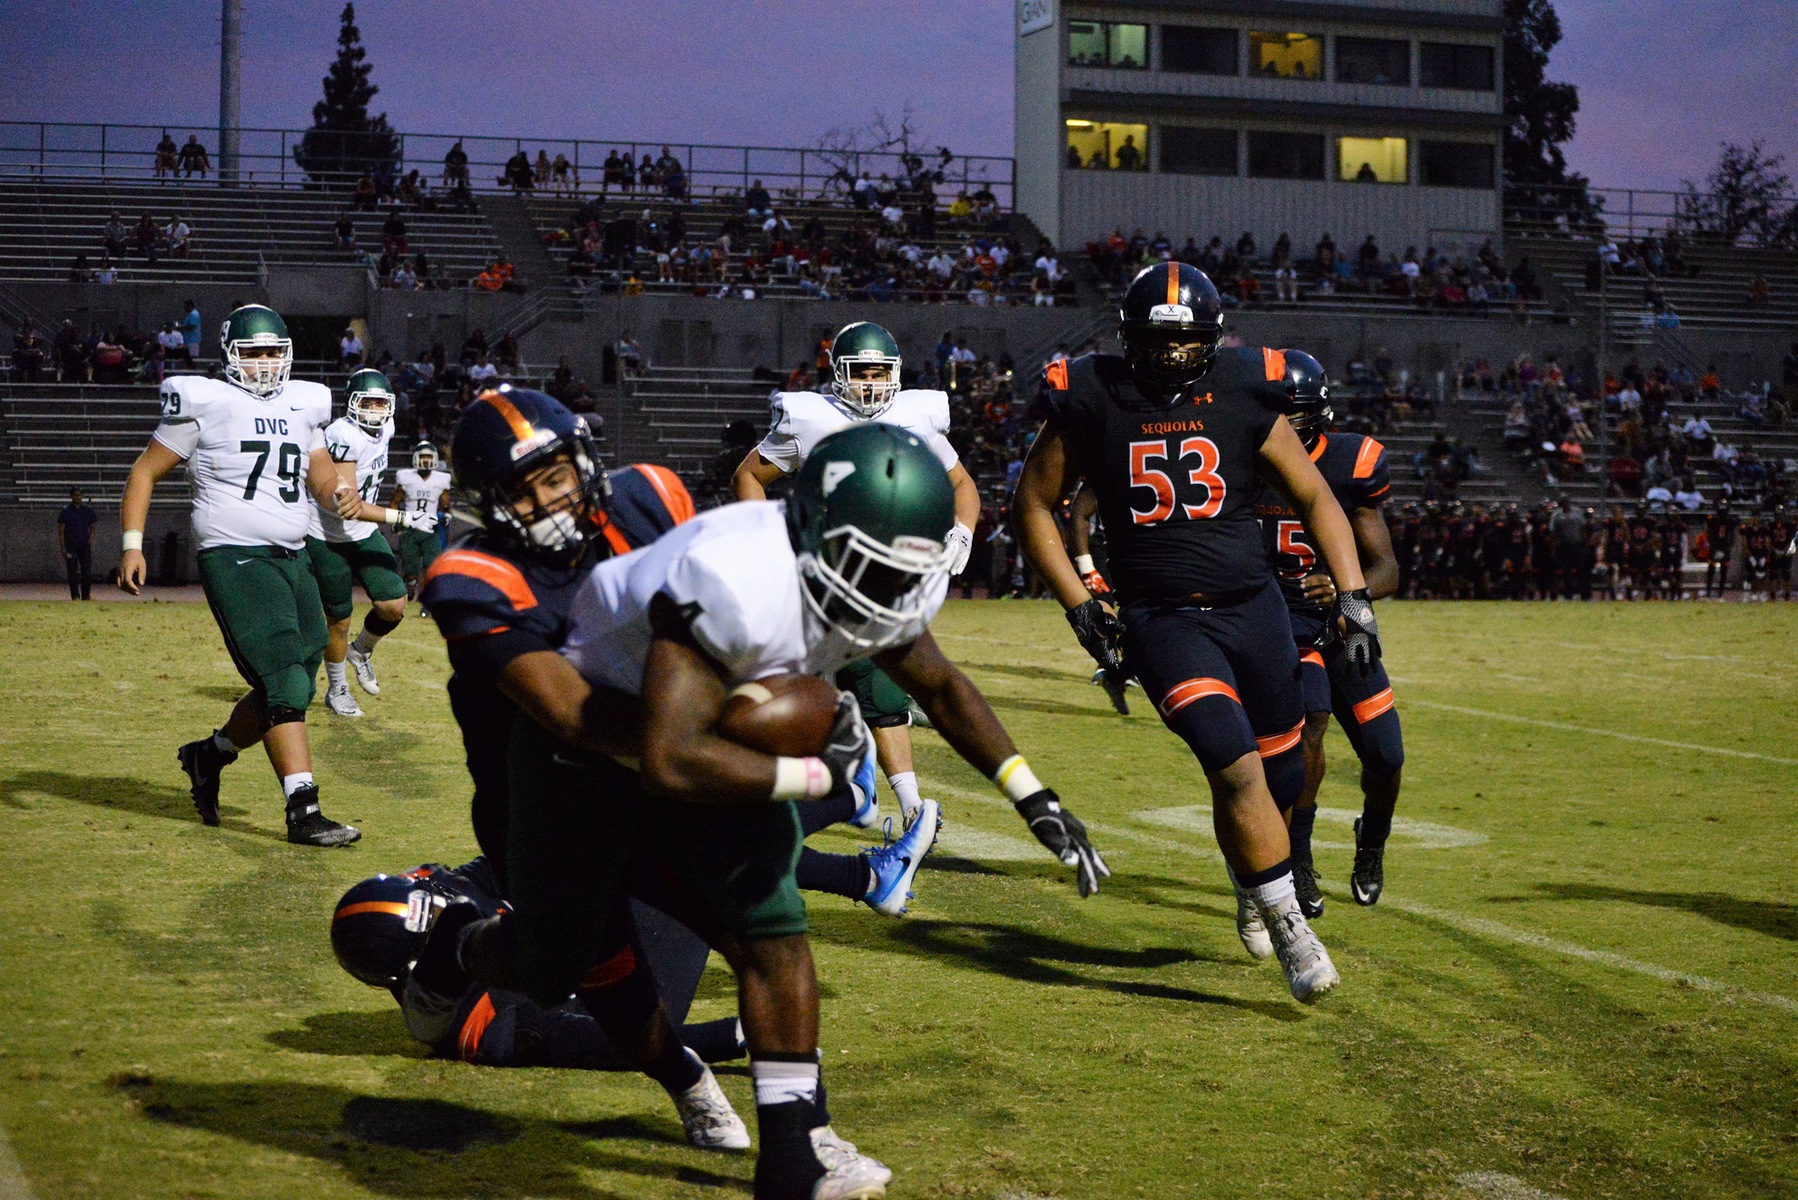 Giants fall at No. 7 Laney College